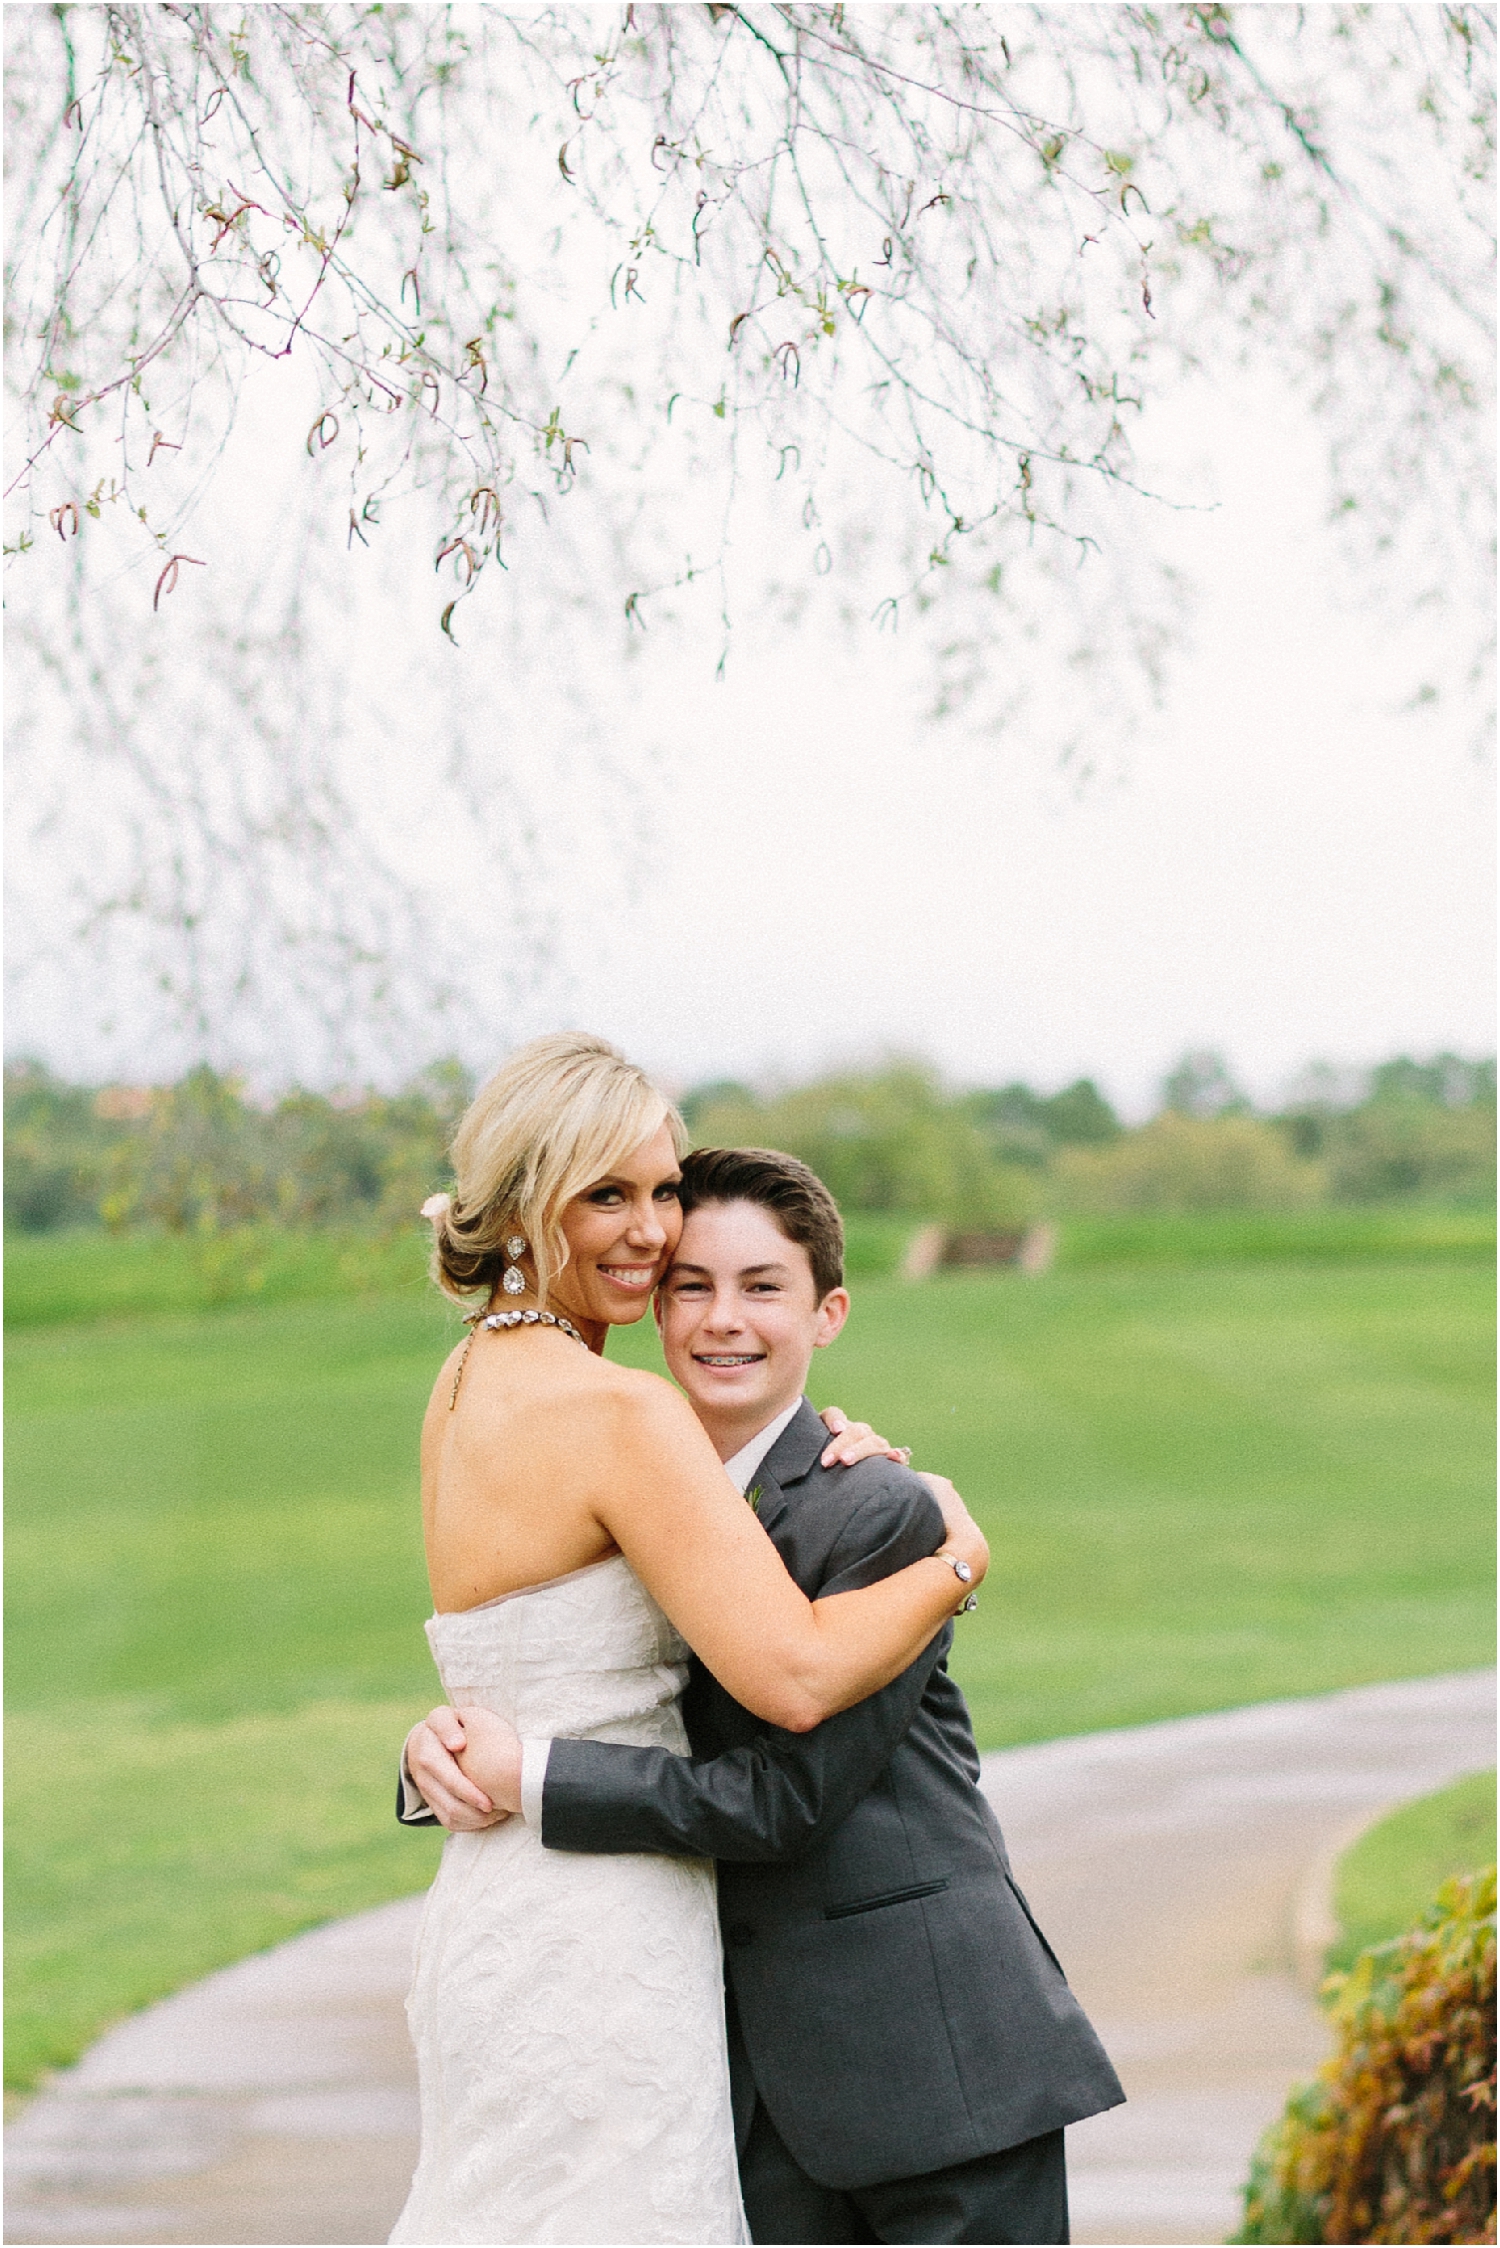 Mother and son hugging on wedding day 